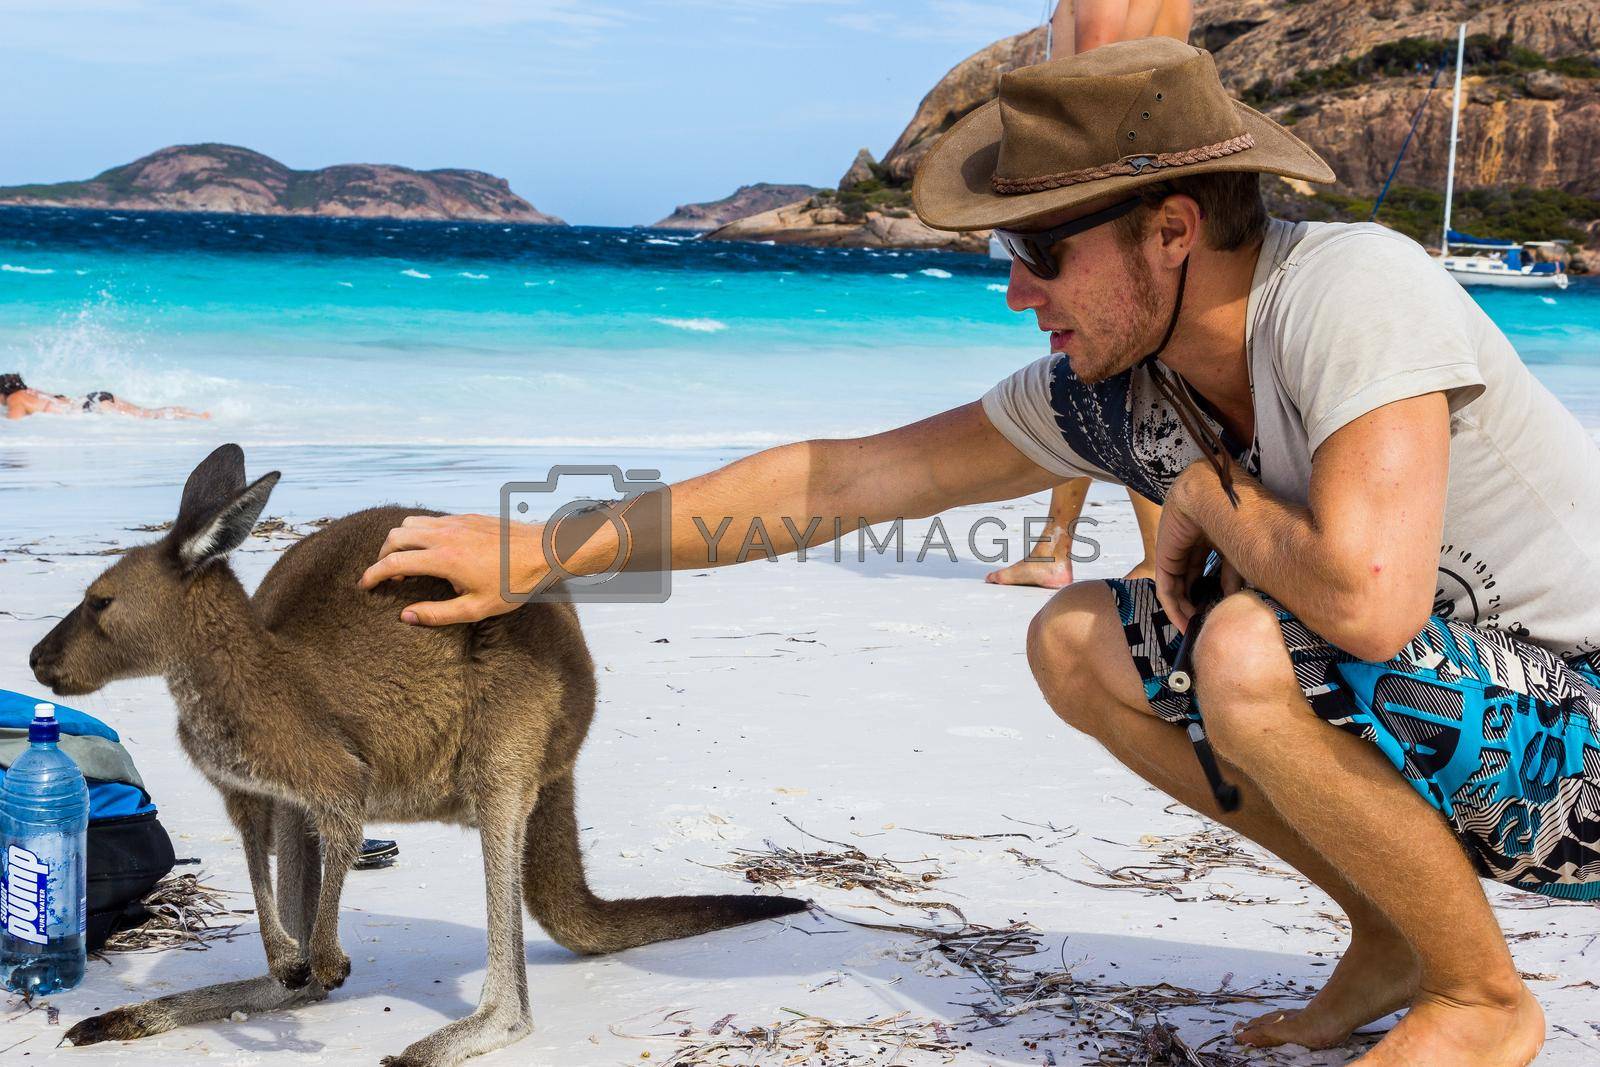 Royalty free image of caucasian man pets a beautiful Kangaroo at Lucky Bay Beach in the Cape Le Grand National Park near Esperance, Australia by bettercallcurry